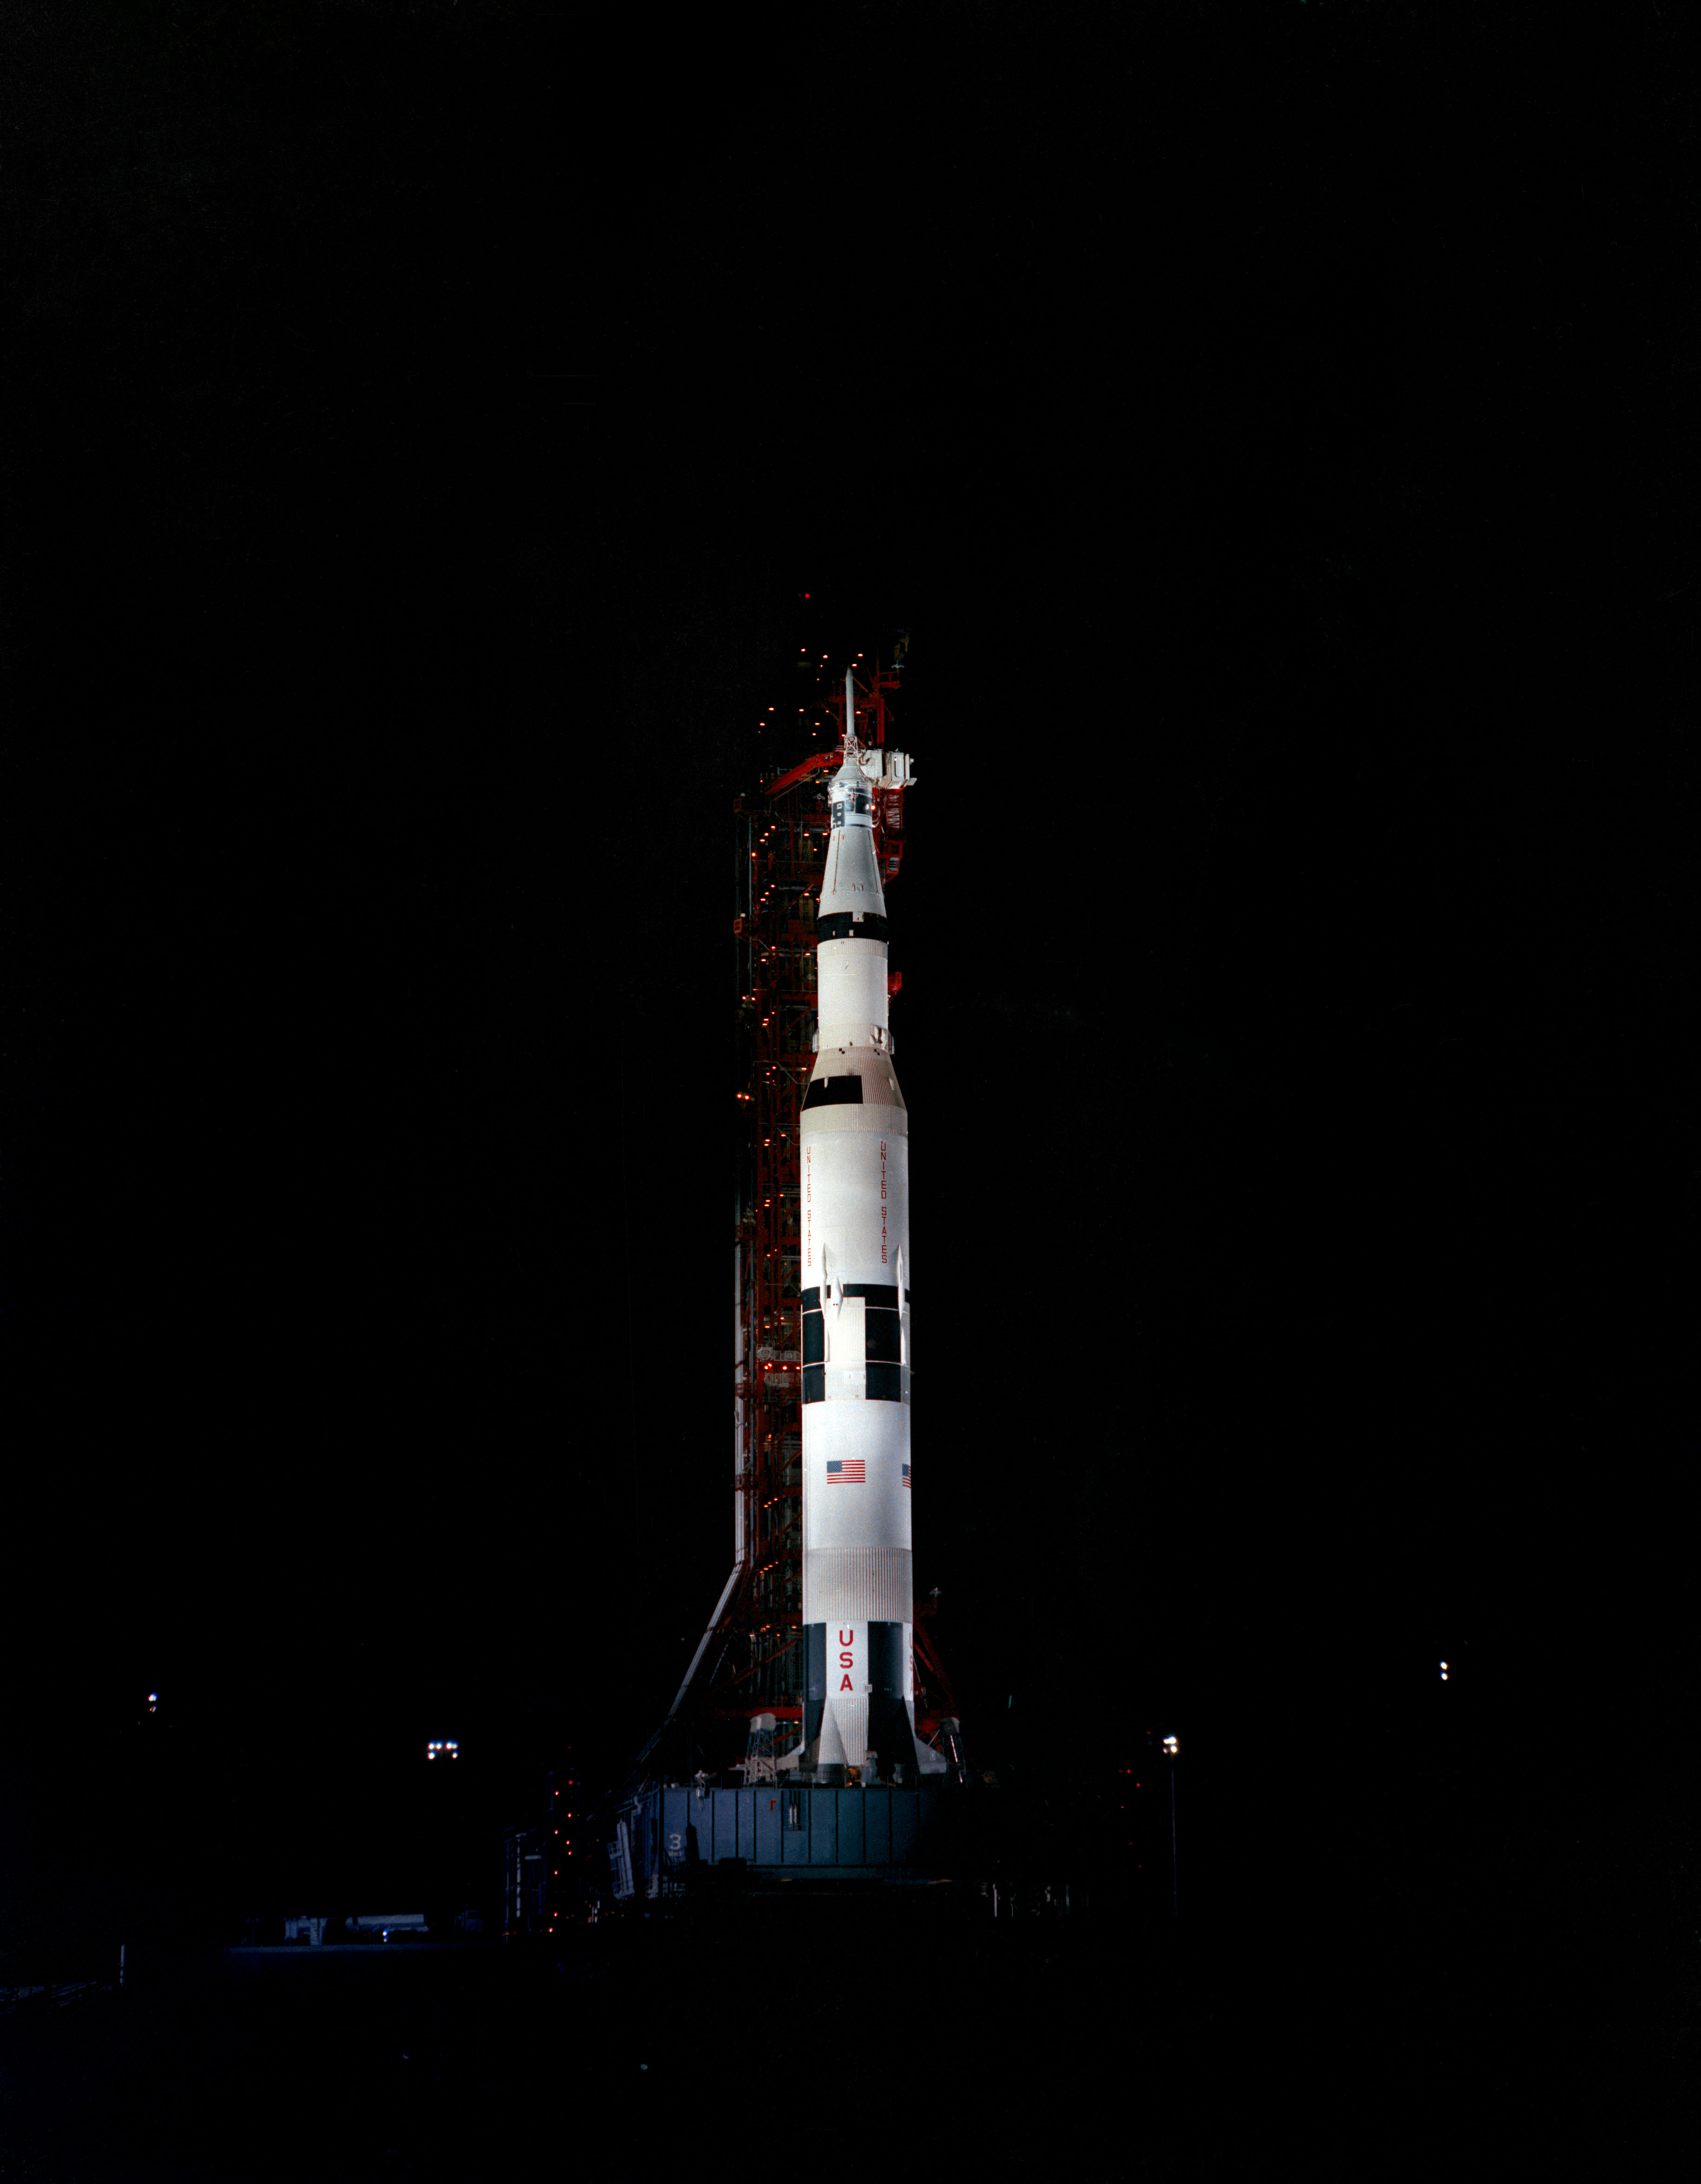 The Apollo 10 spacecraft towers over the launch pad spotlights that light it. It is white, with an American flag and "USA" on the lower portion. It is nighttime.